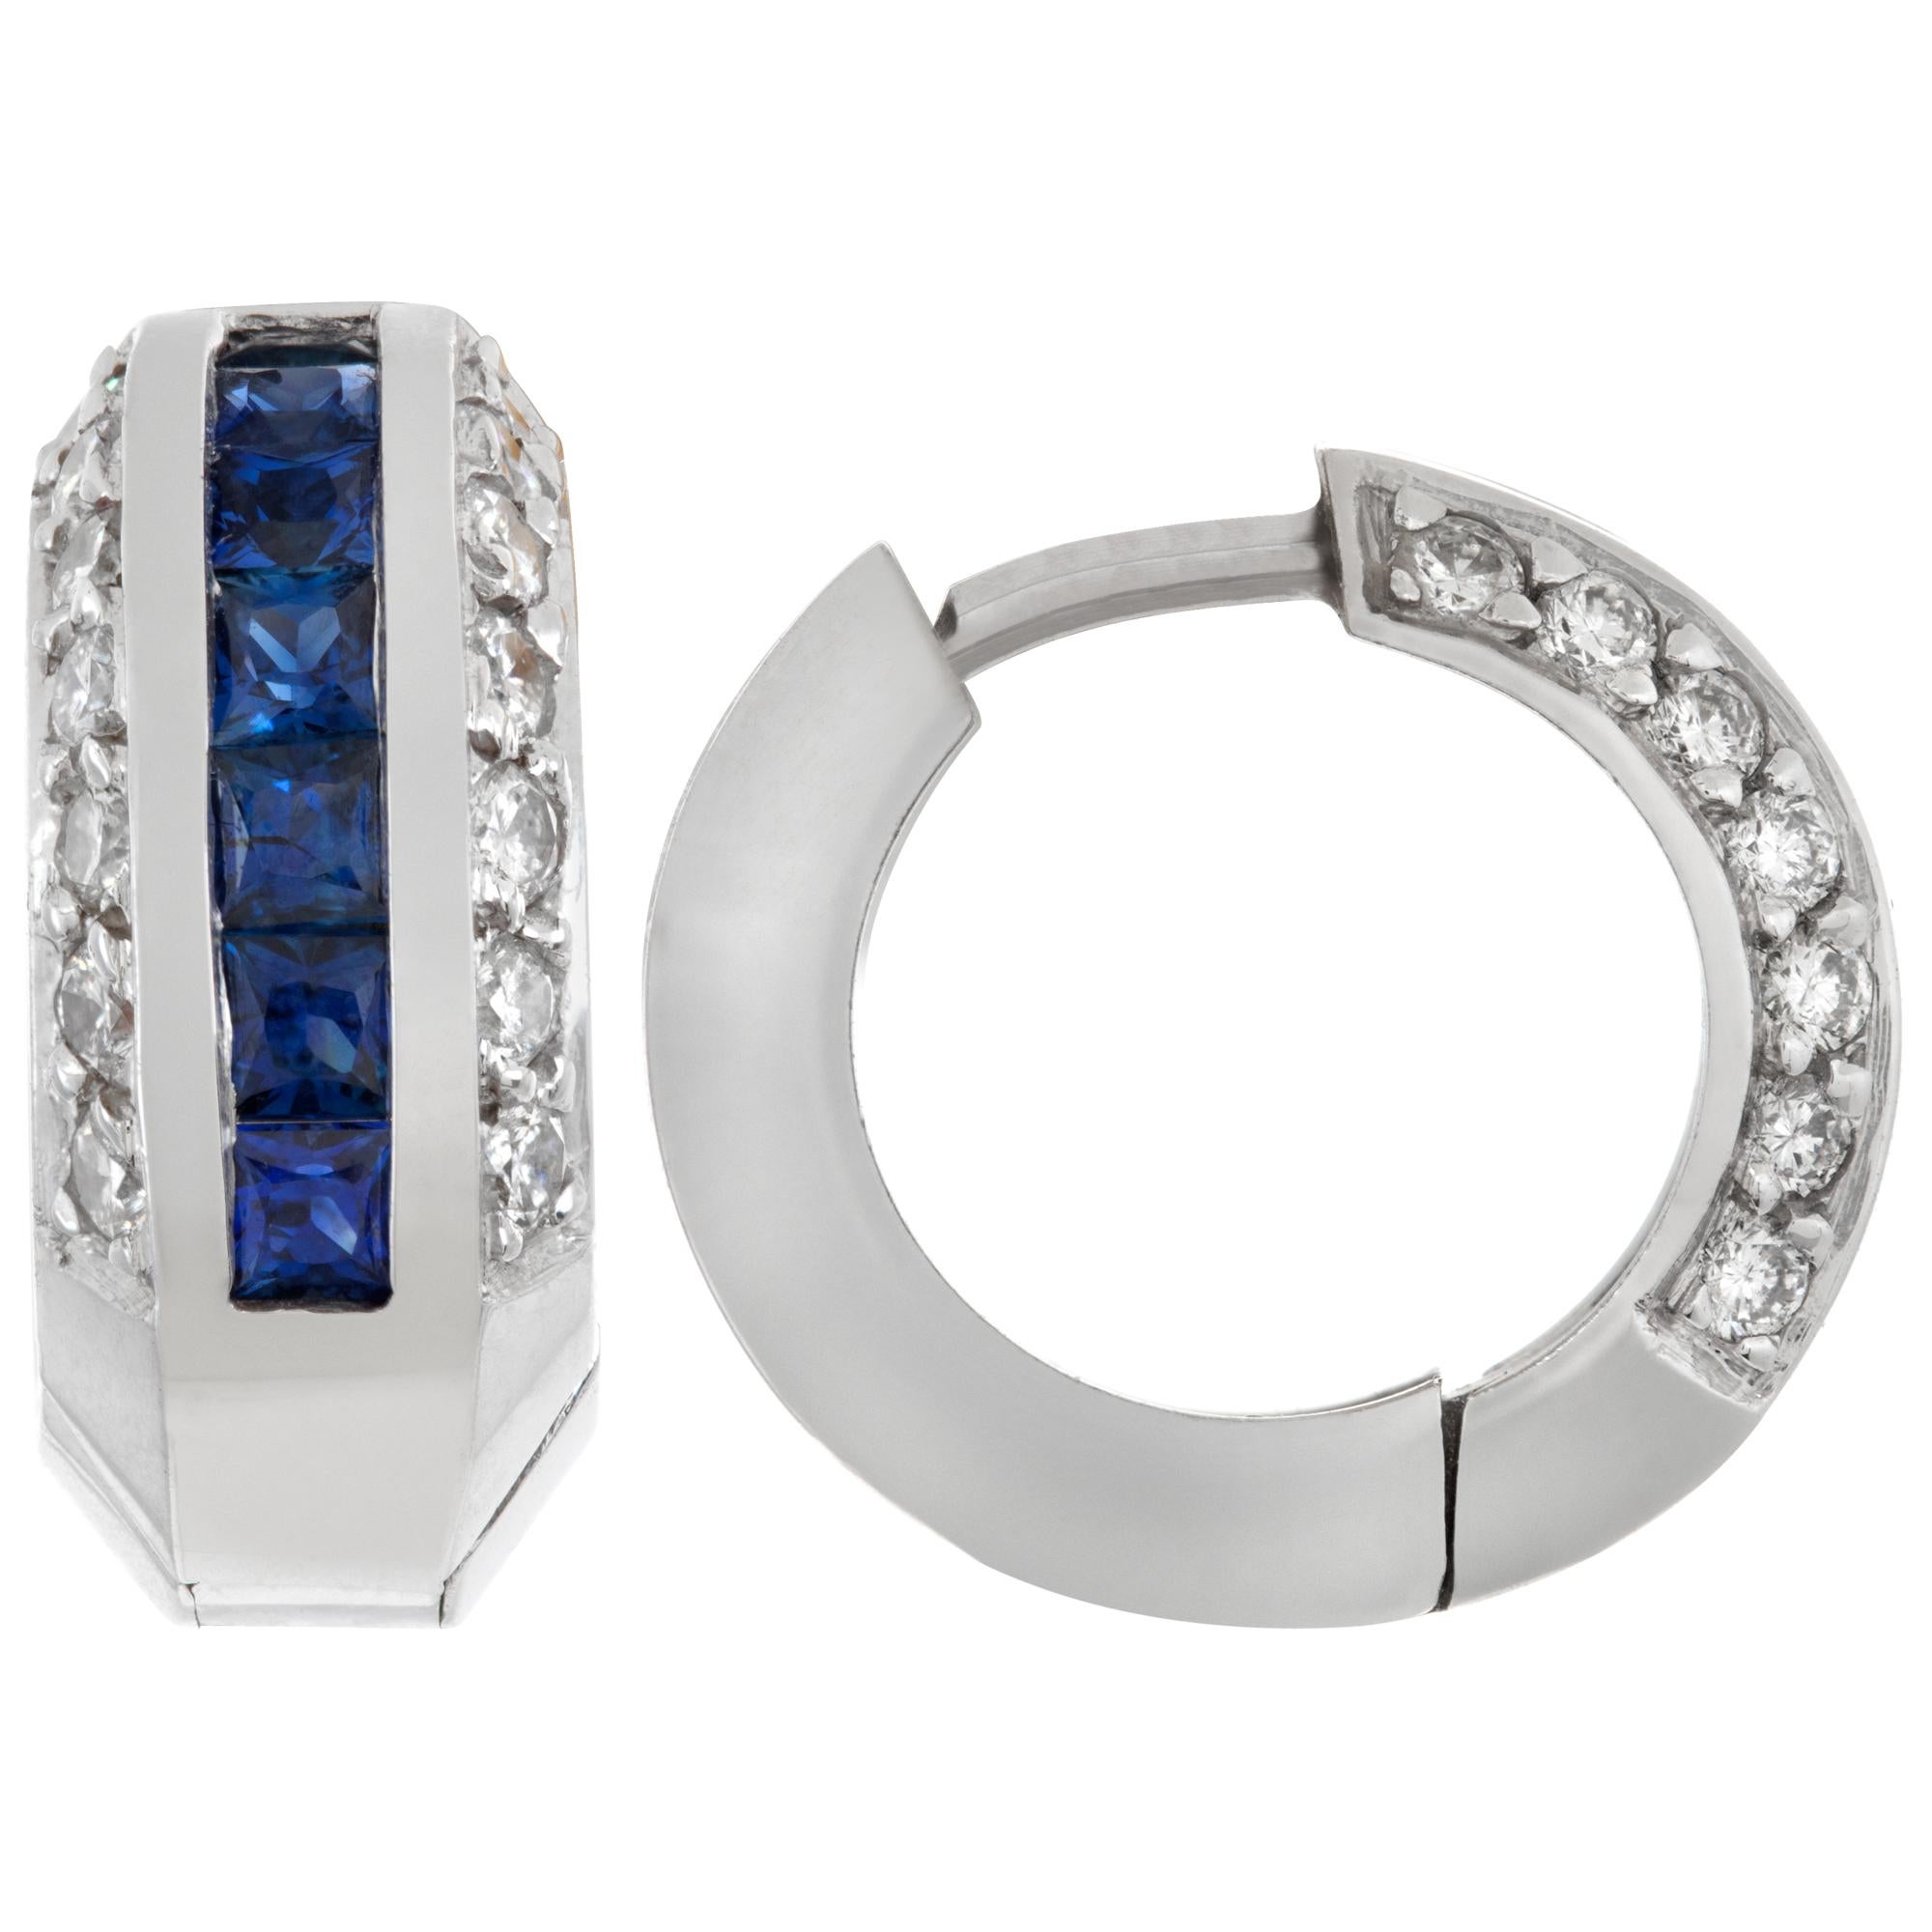 Diamond & sapphire 18k white gold huggie earrings In Excellent Condition For Sale In Surfside, FL